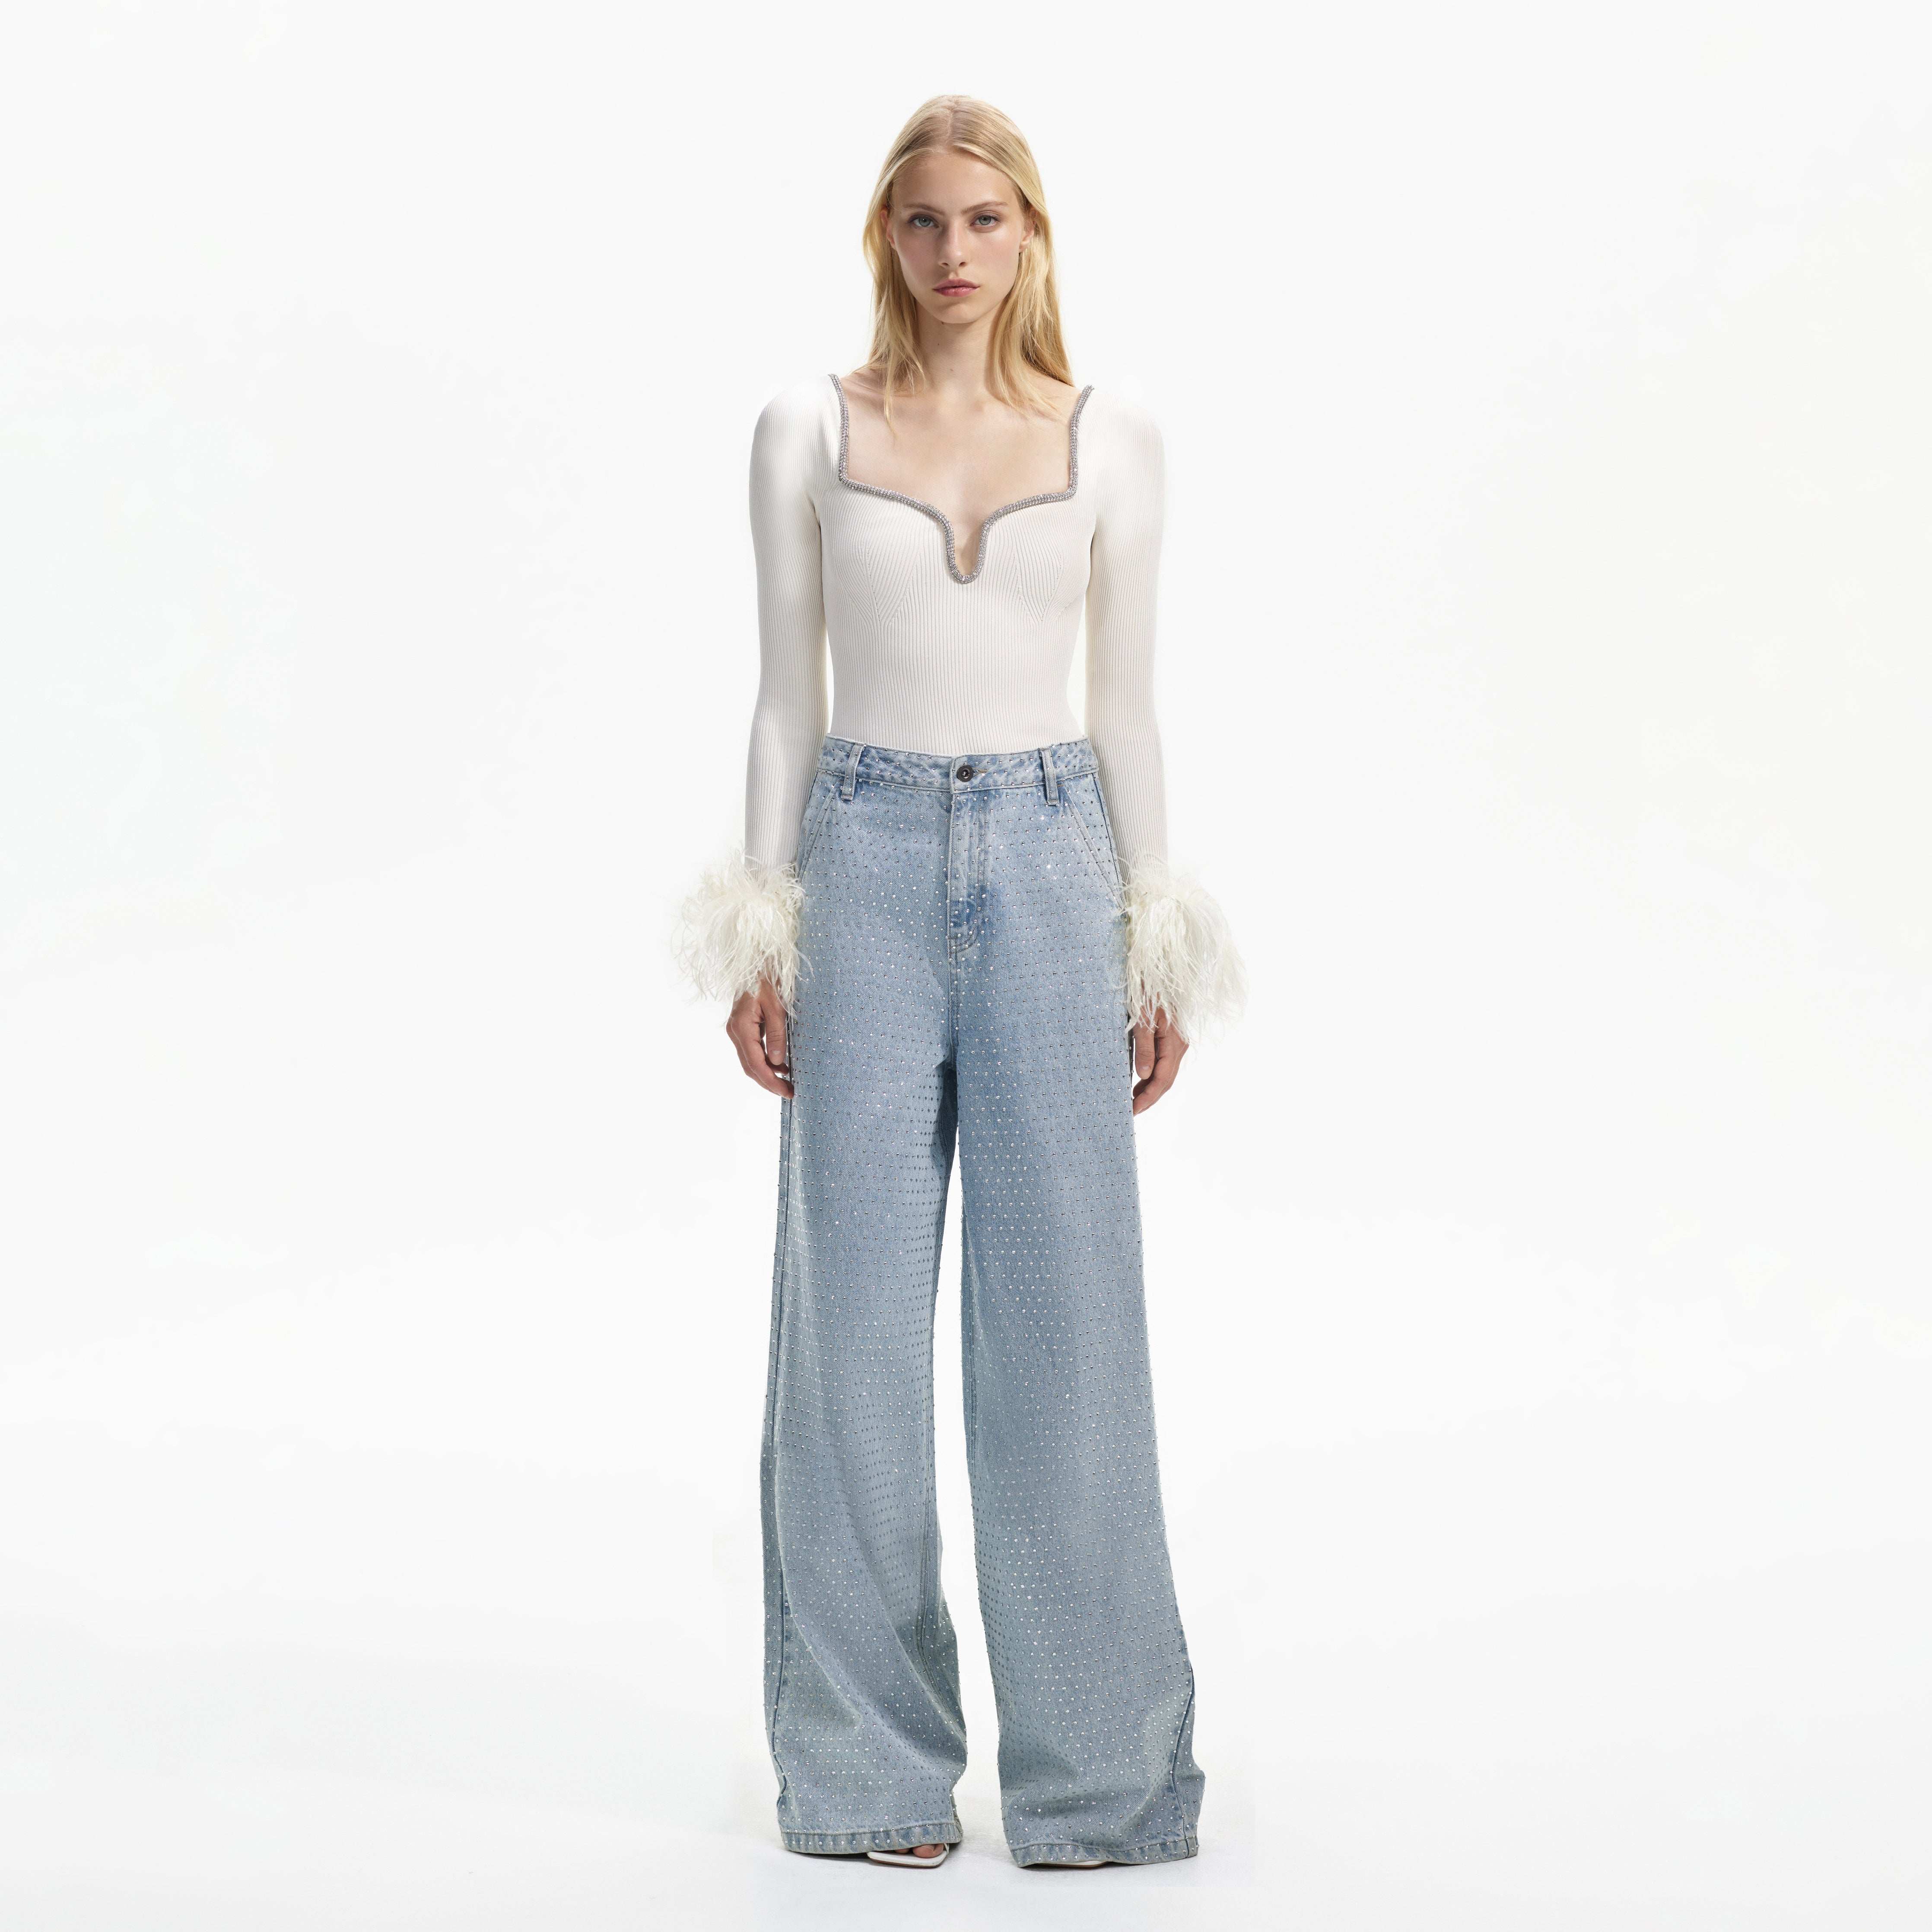 Off White Knit Feather Top – self-portrait